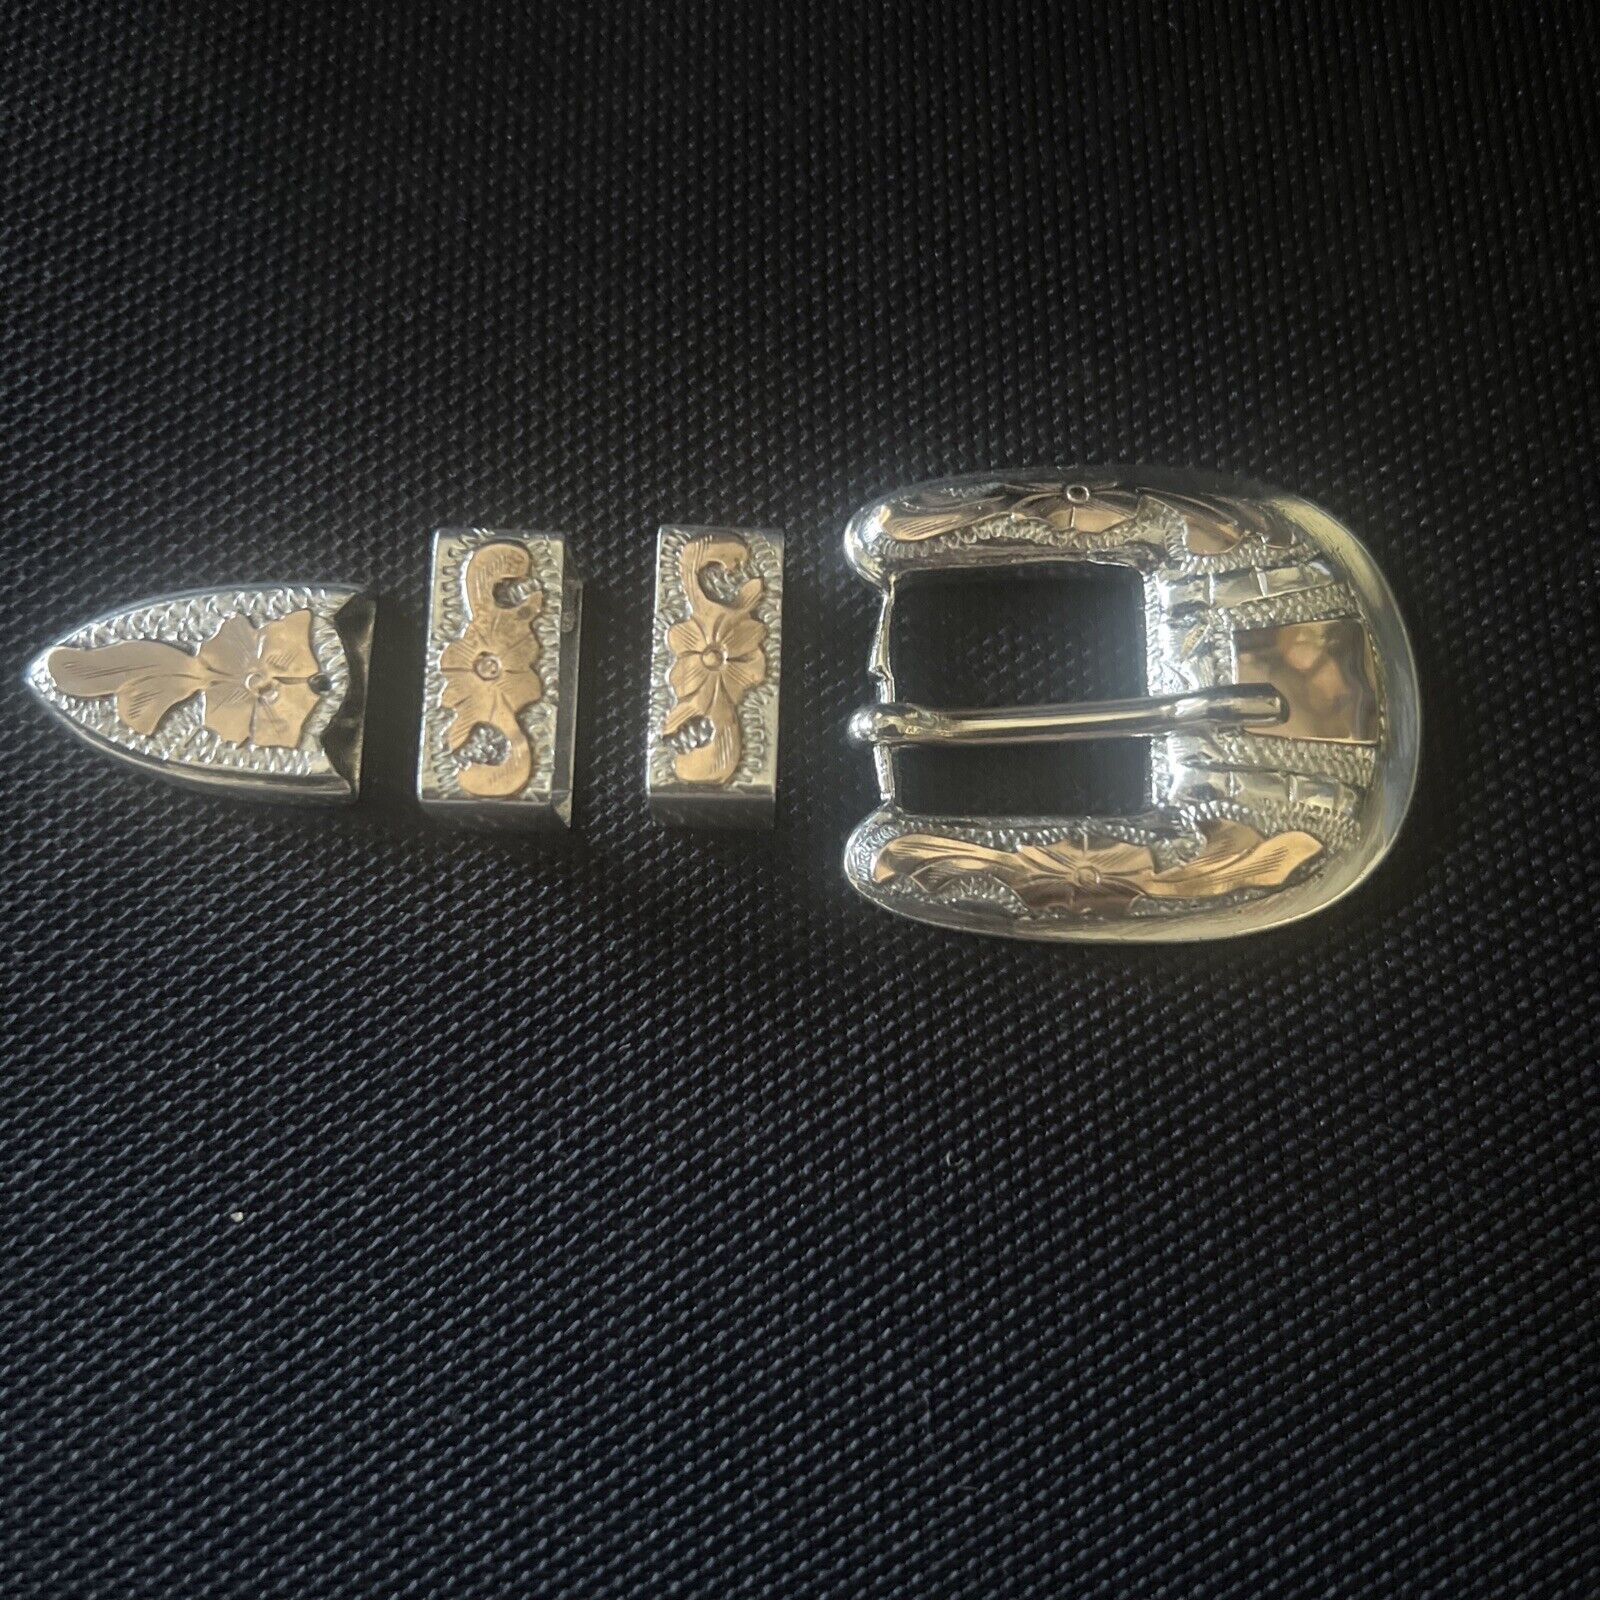 Sterling Silver And Rose Gold Belt Buckle And Belt Ends Made In Mexico